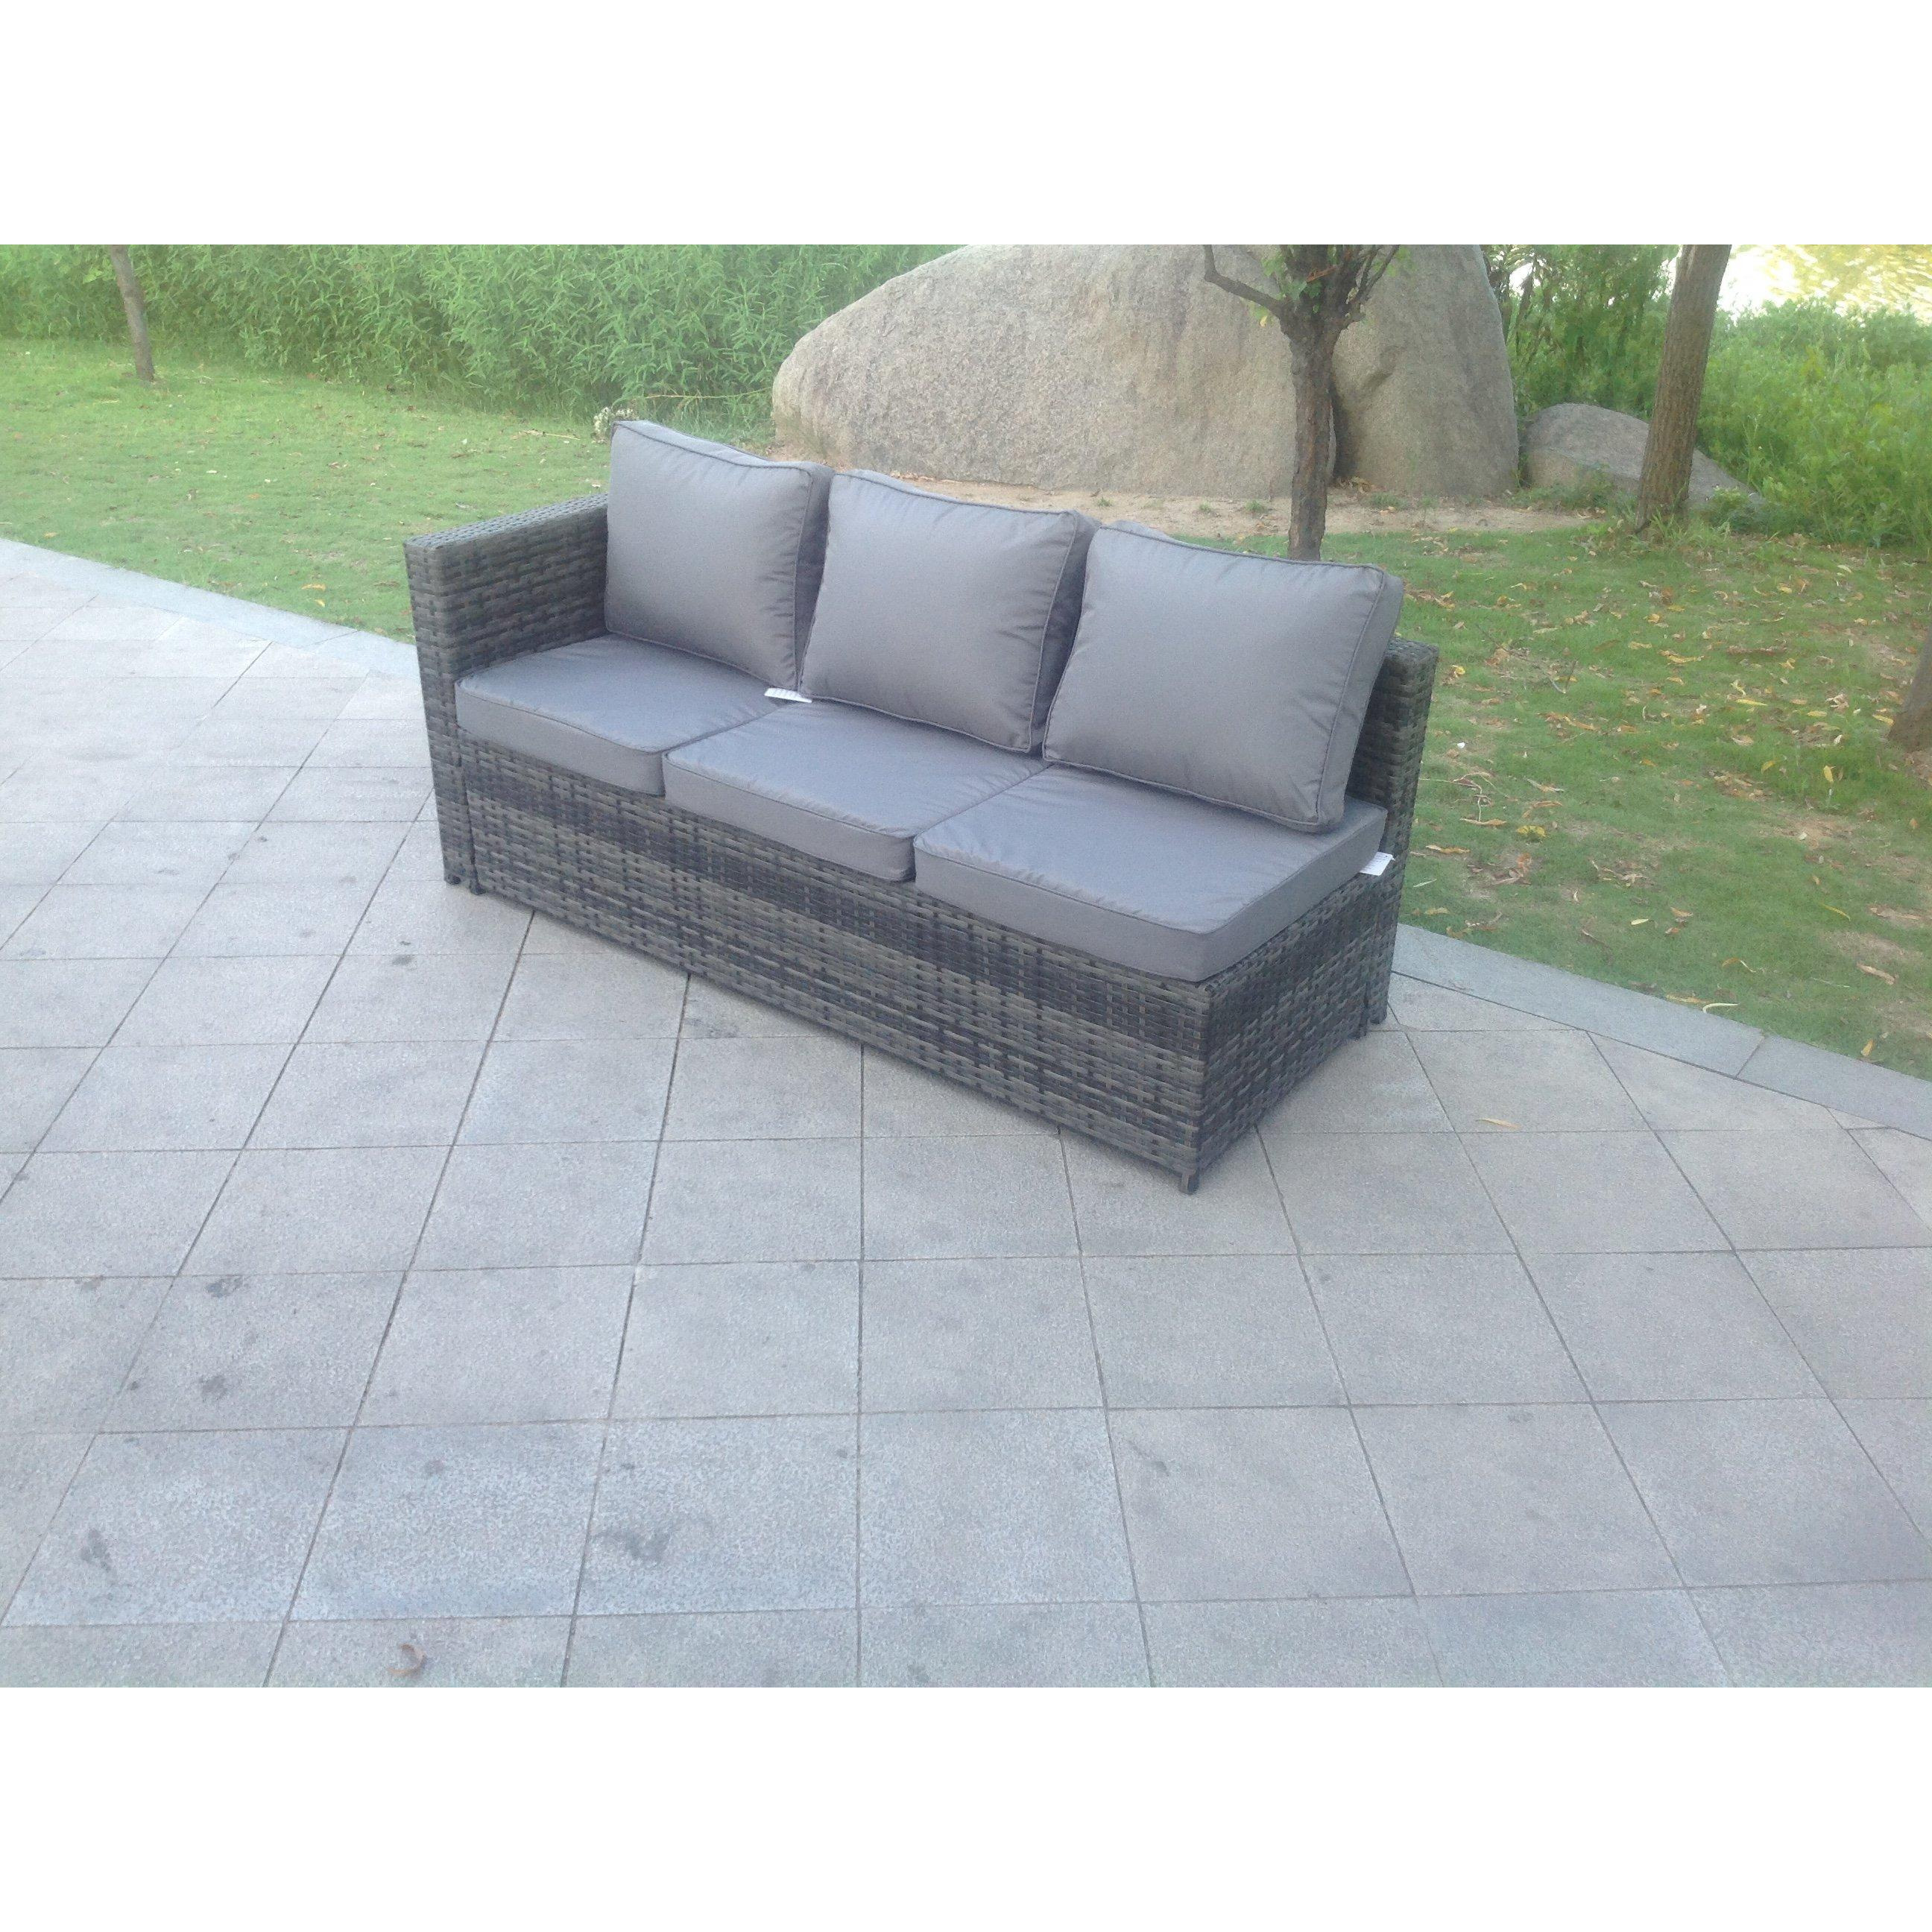 3 Seater Single Arm Rest Rattan Sofa Patio Outdoor Garden Furniture With Seat And Back Cushion Left Side - image 1